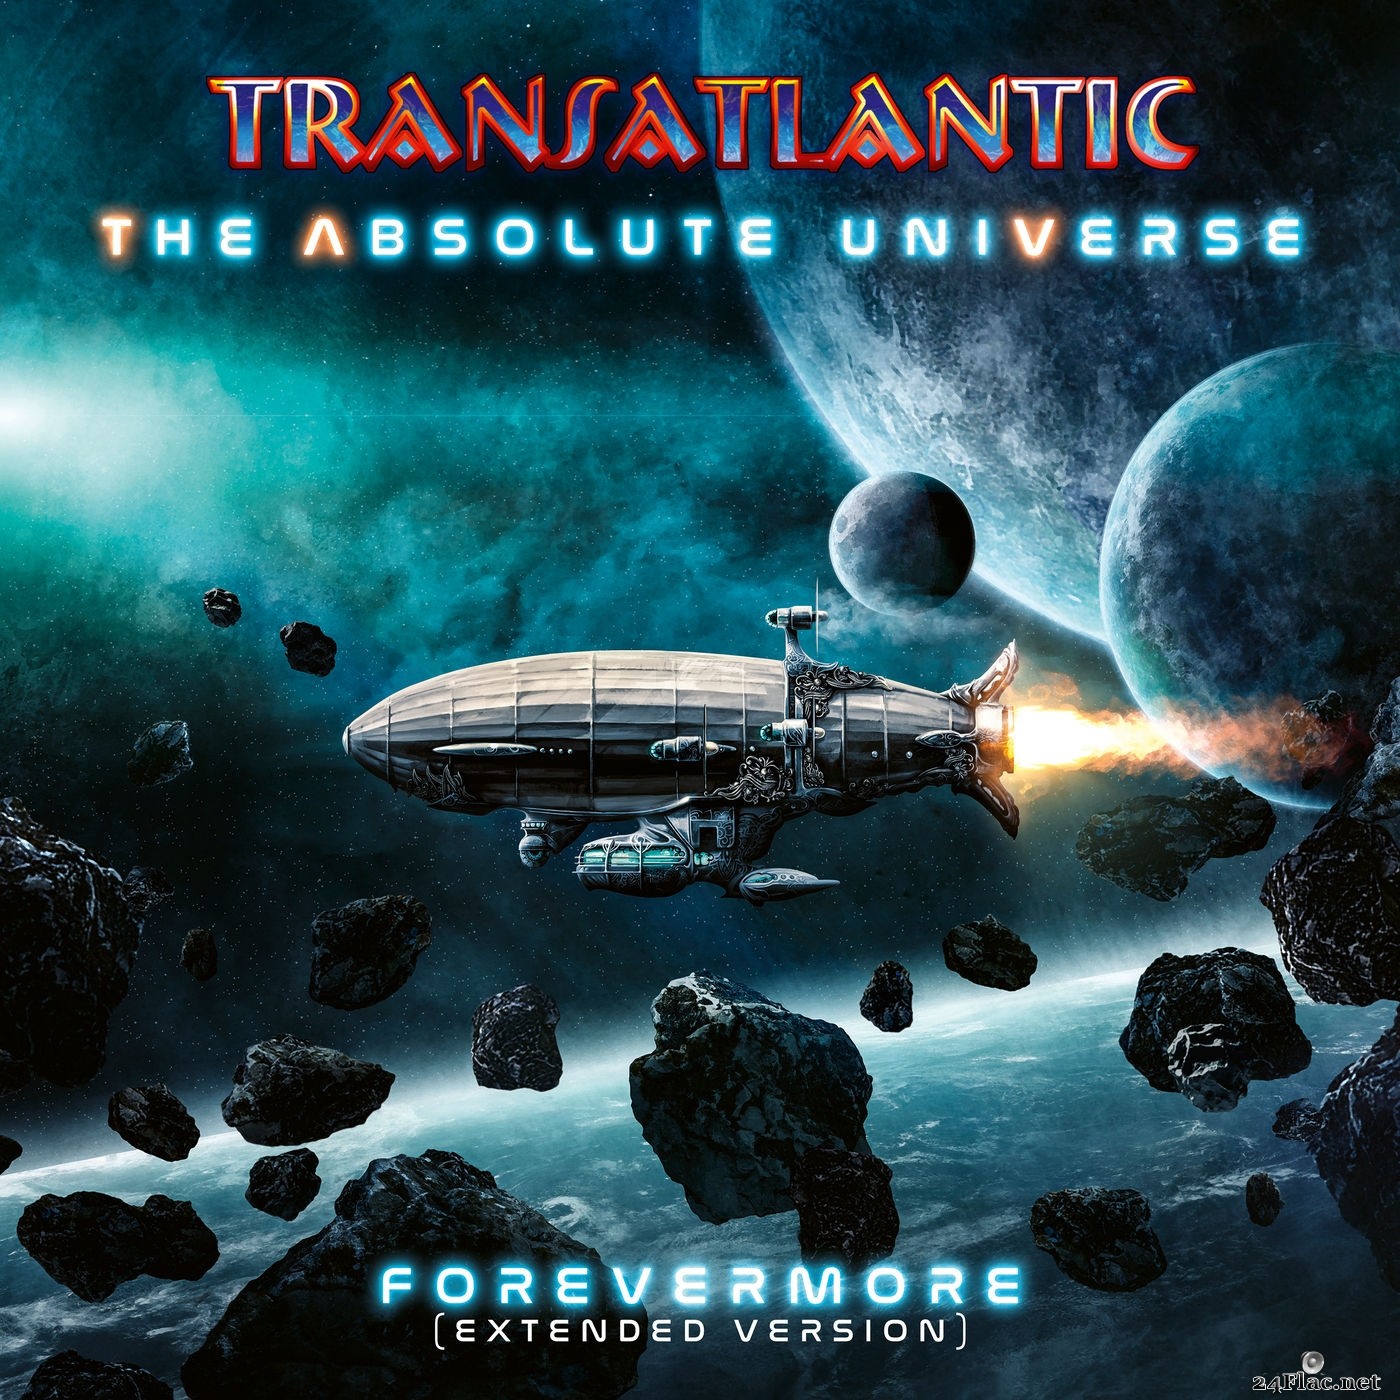 Transatlantic - The Absolute Universe: Forevermore (Extended Version) (2021) Hi-Res